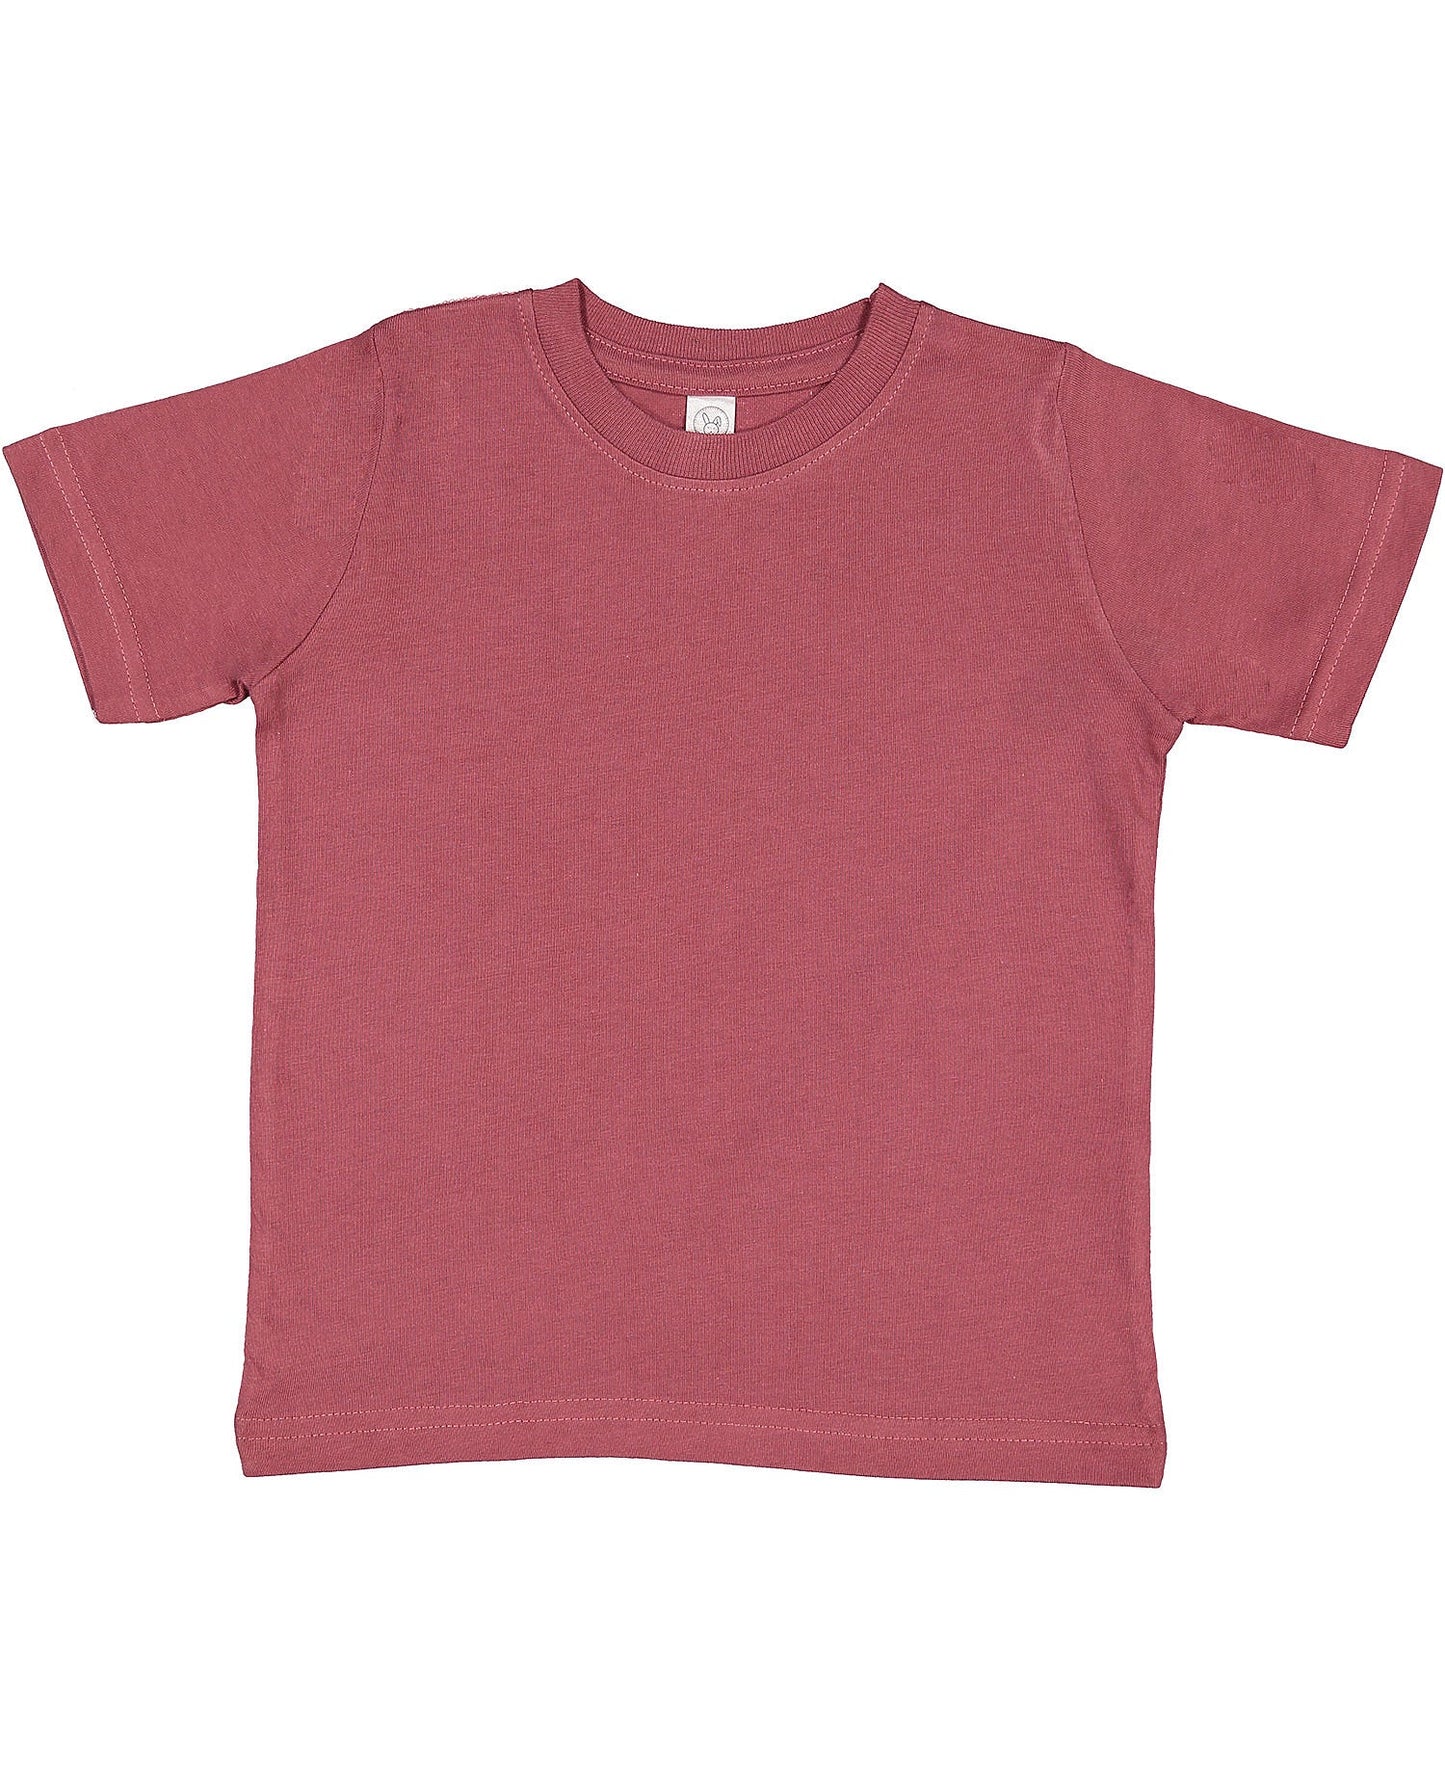 Rabbit Skins Youth Tee - Rouge